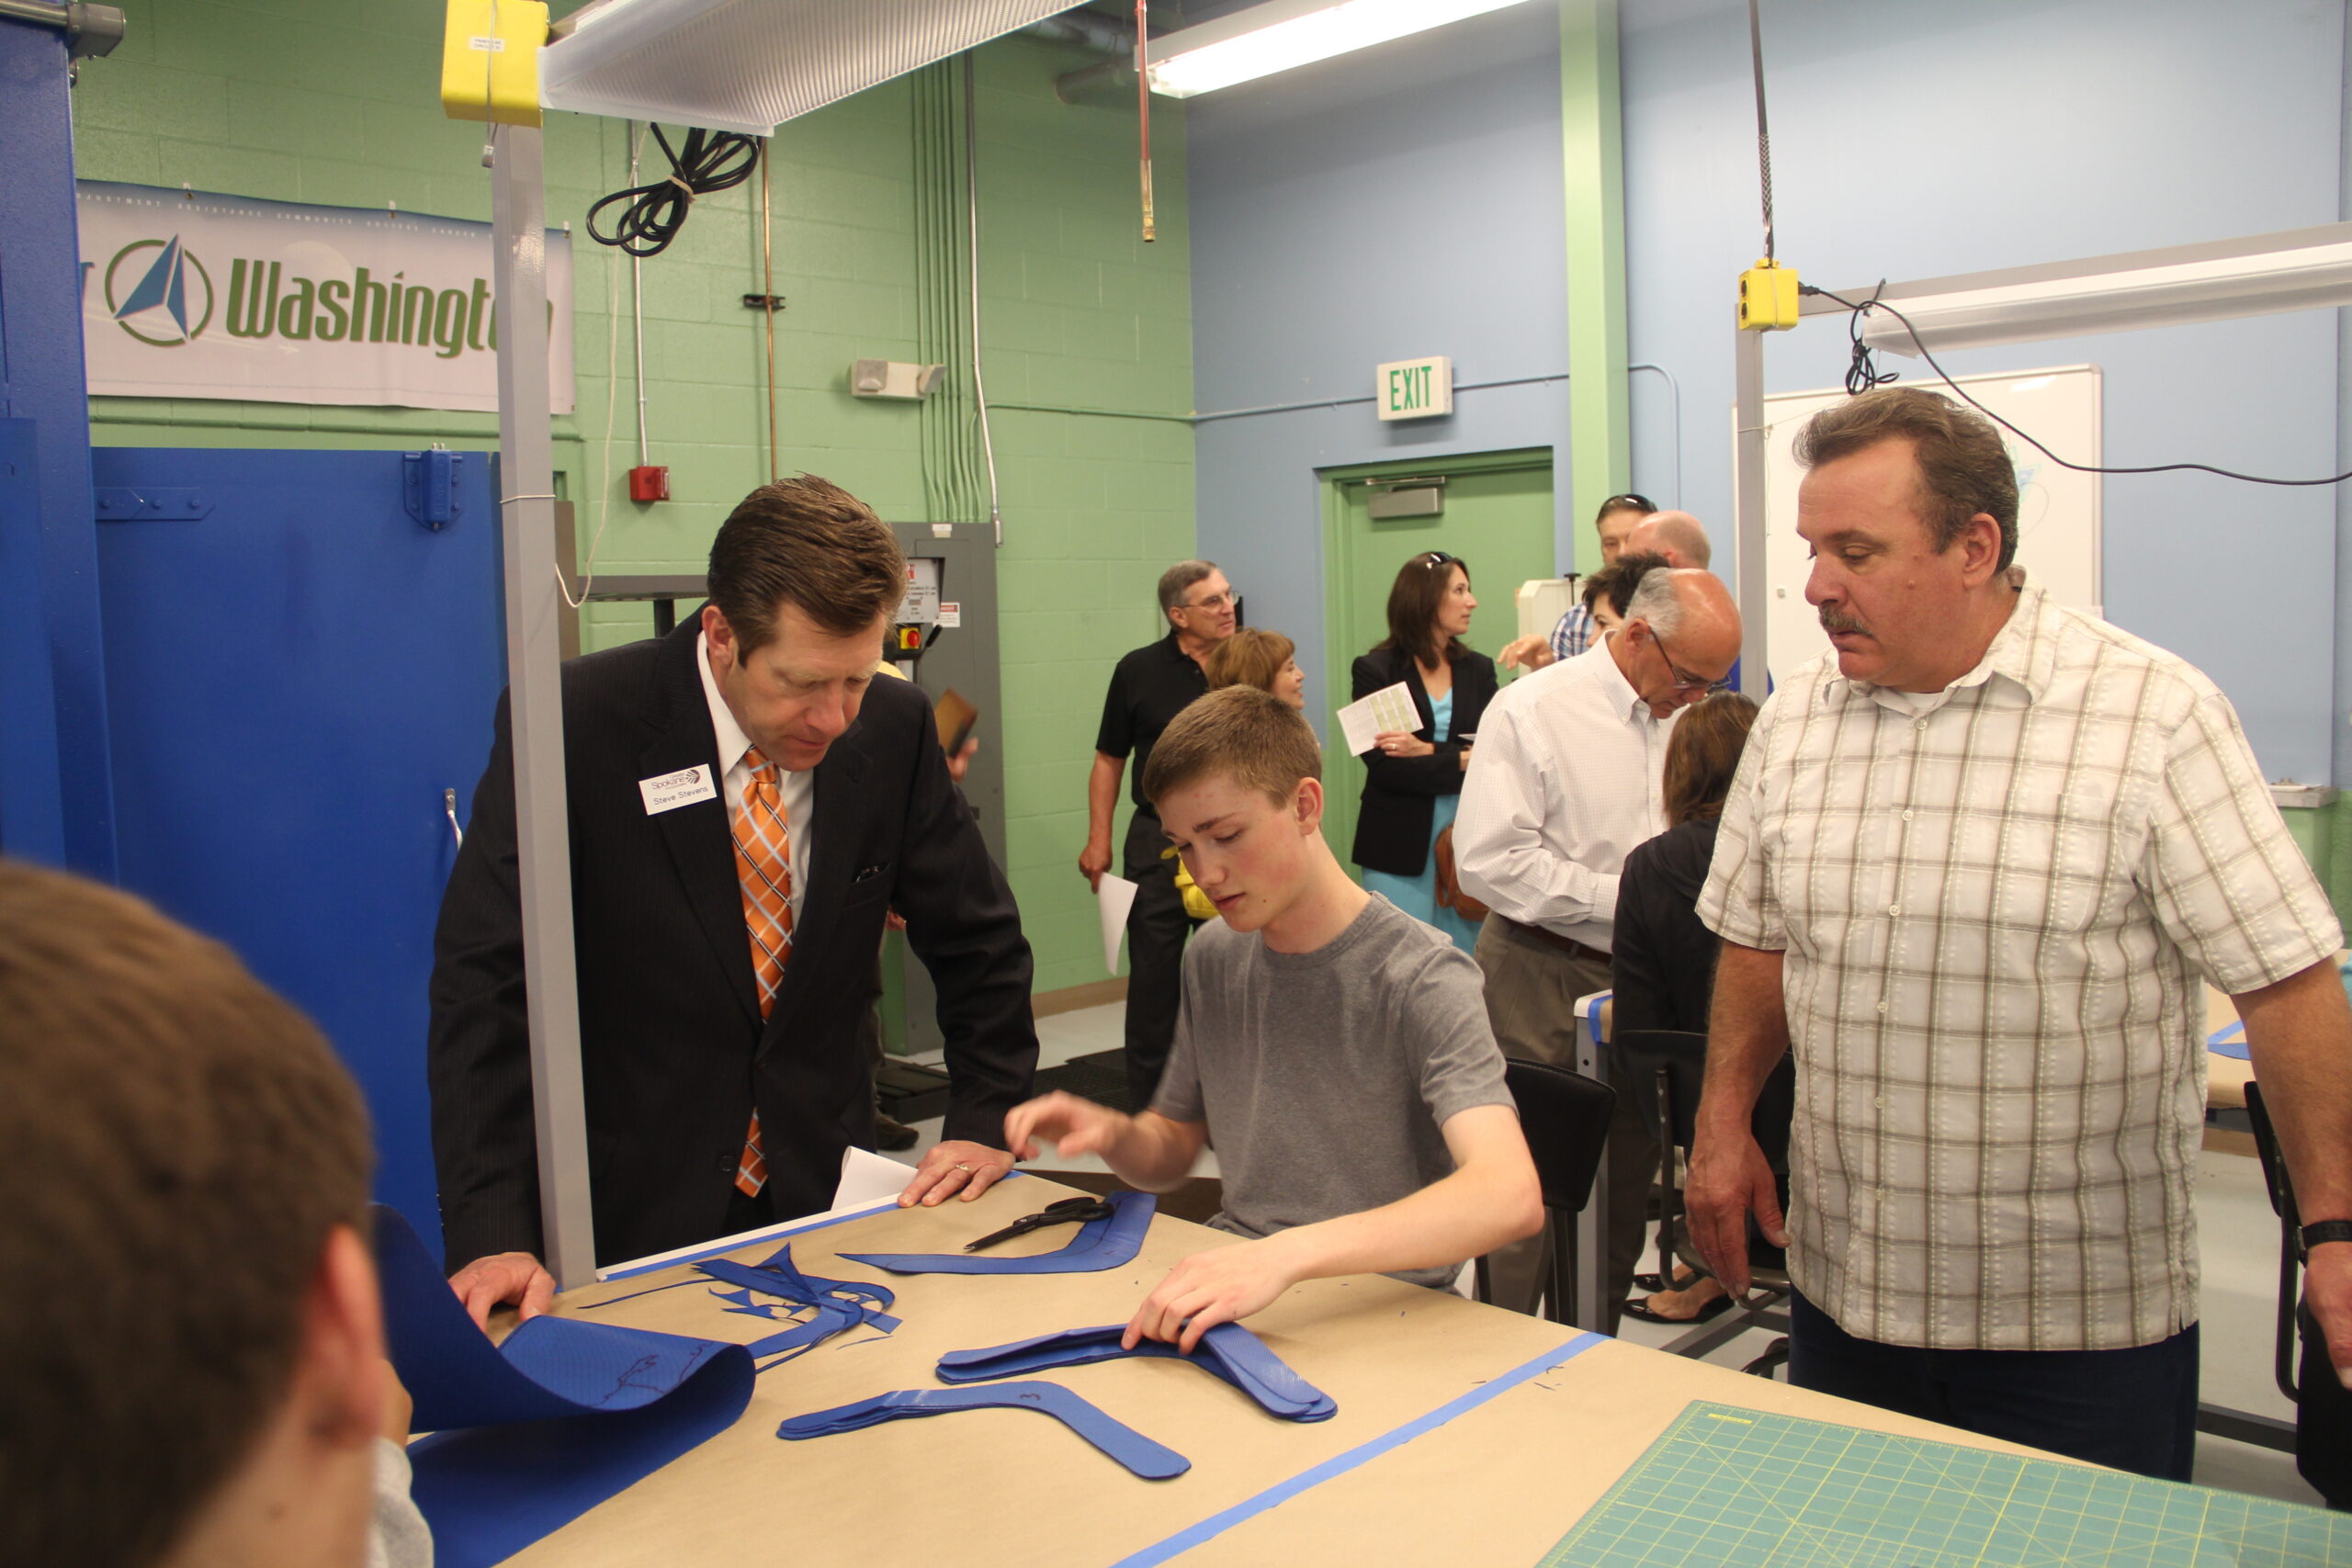 Steve visits with a high school student in a summer program at Spokane Community College's Composites Lab.